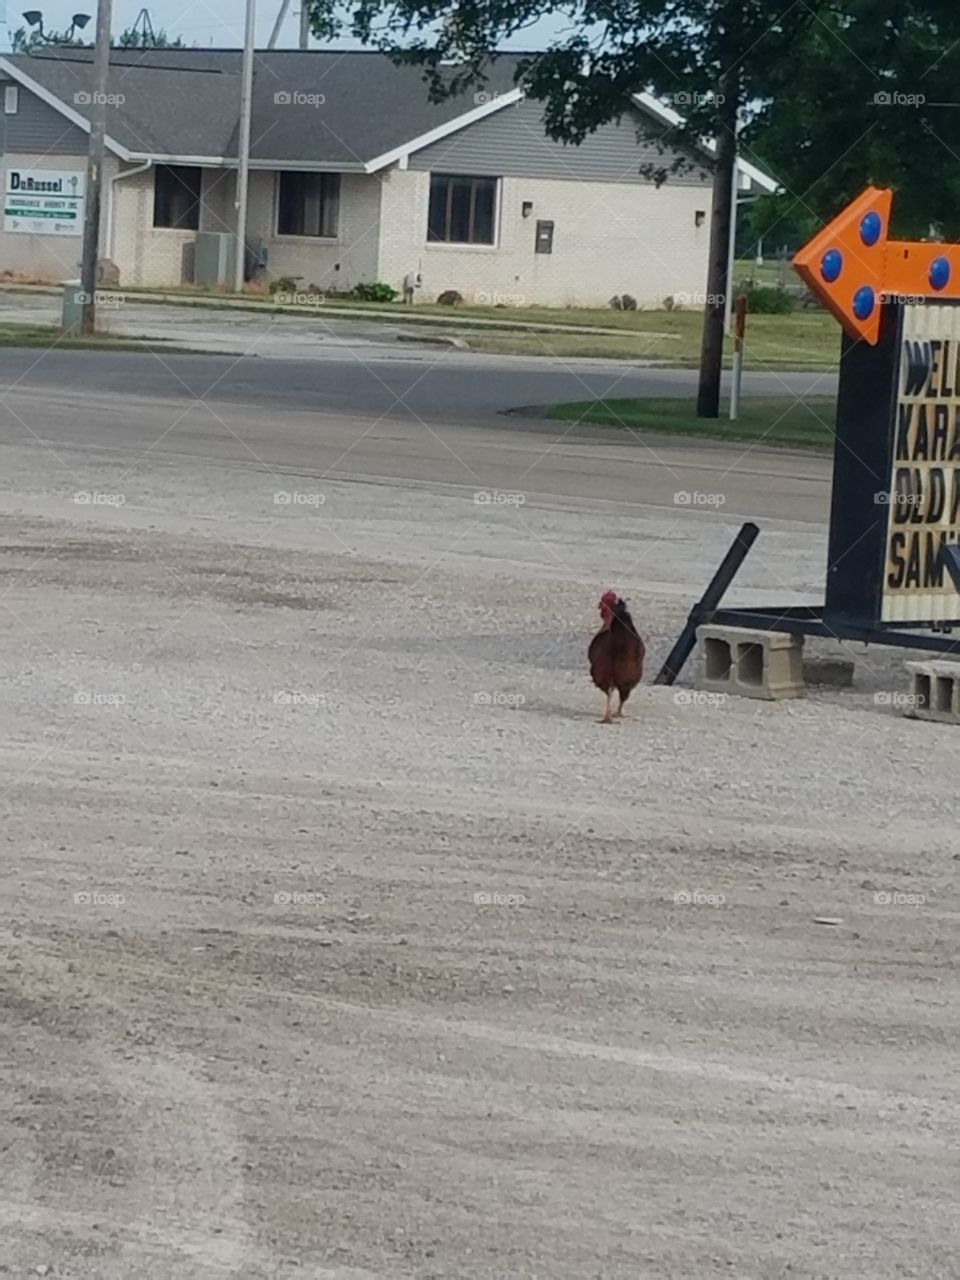 why did the chicken cross the rd